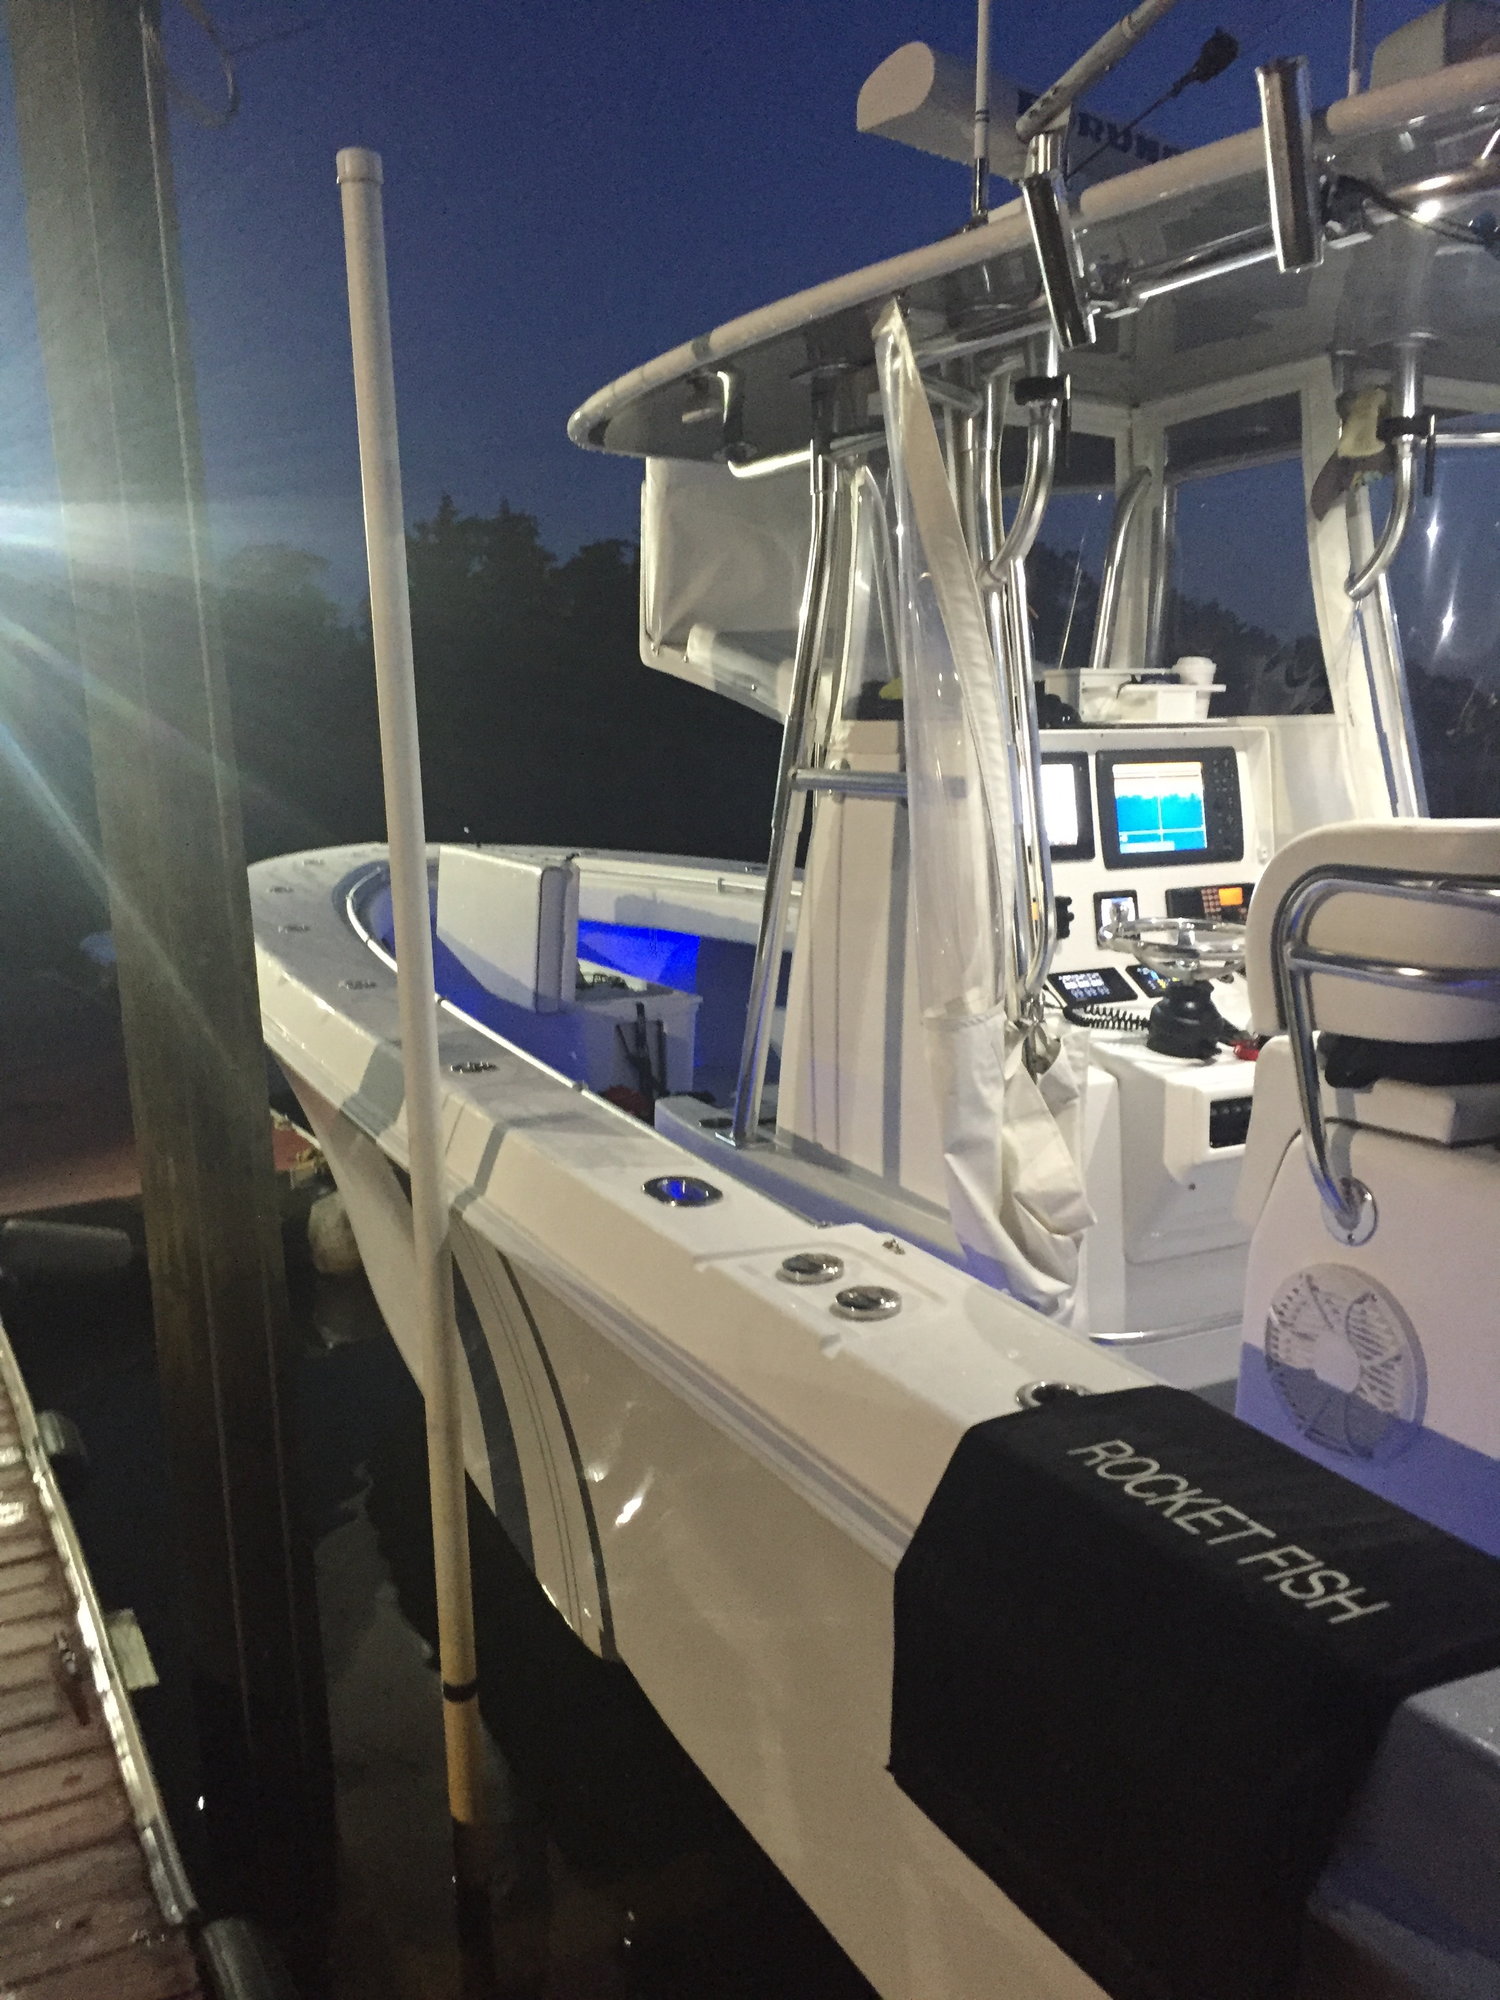 Gemlux Rod Holders? - The Hull Truth - Boating and Fishing Forum